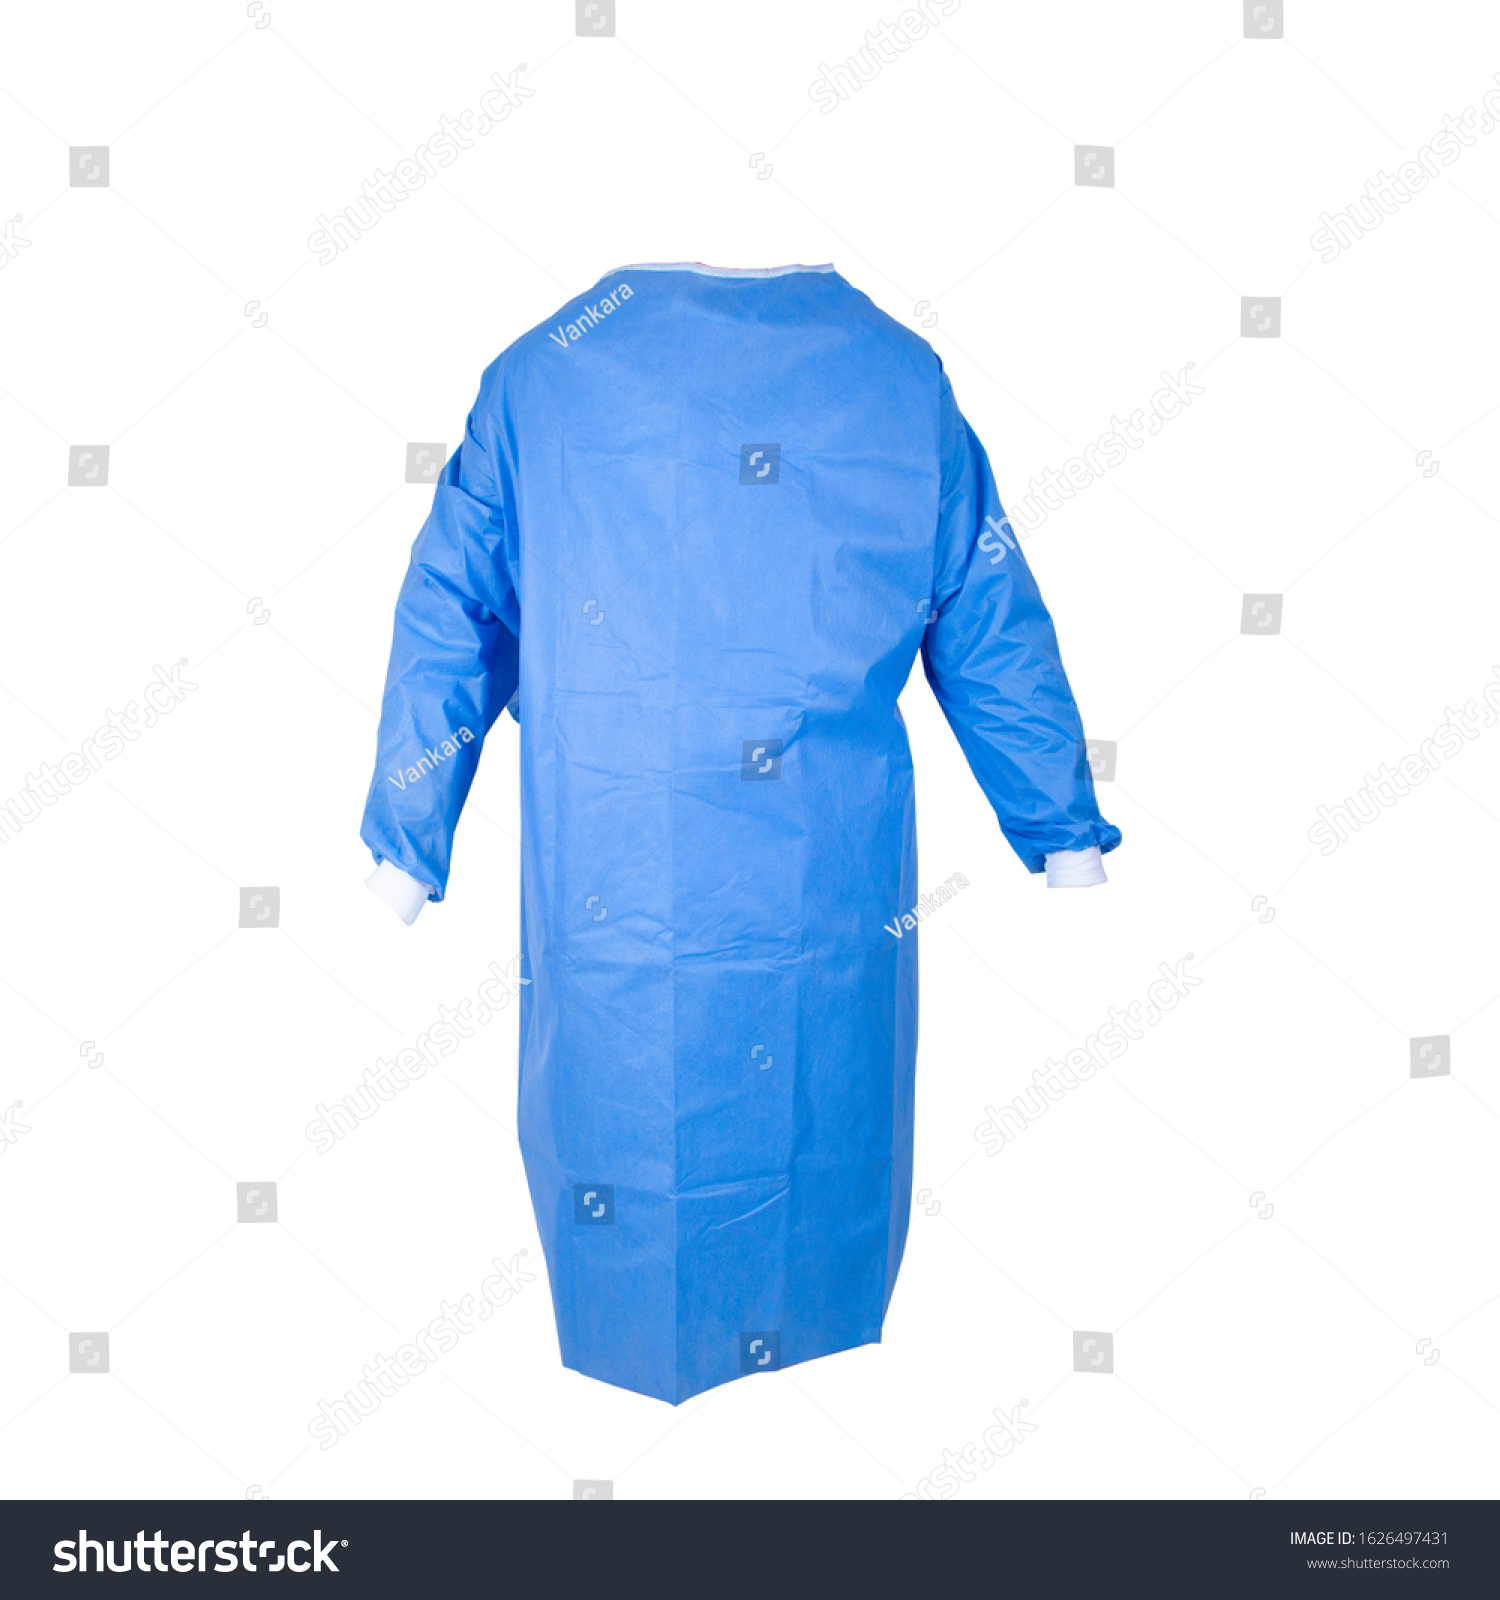 disposable surgical gown for surgery
 #1626497431